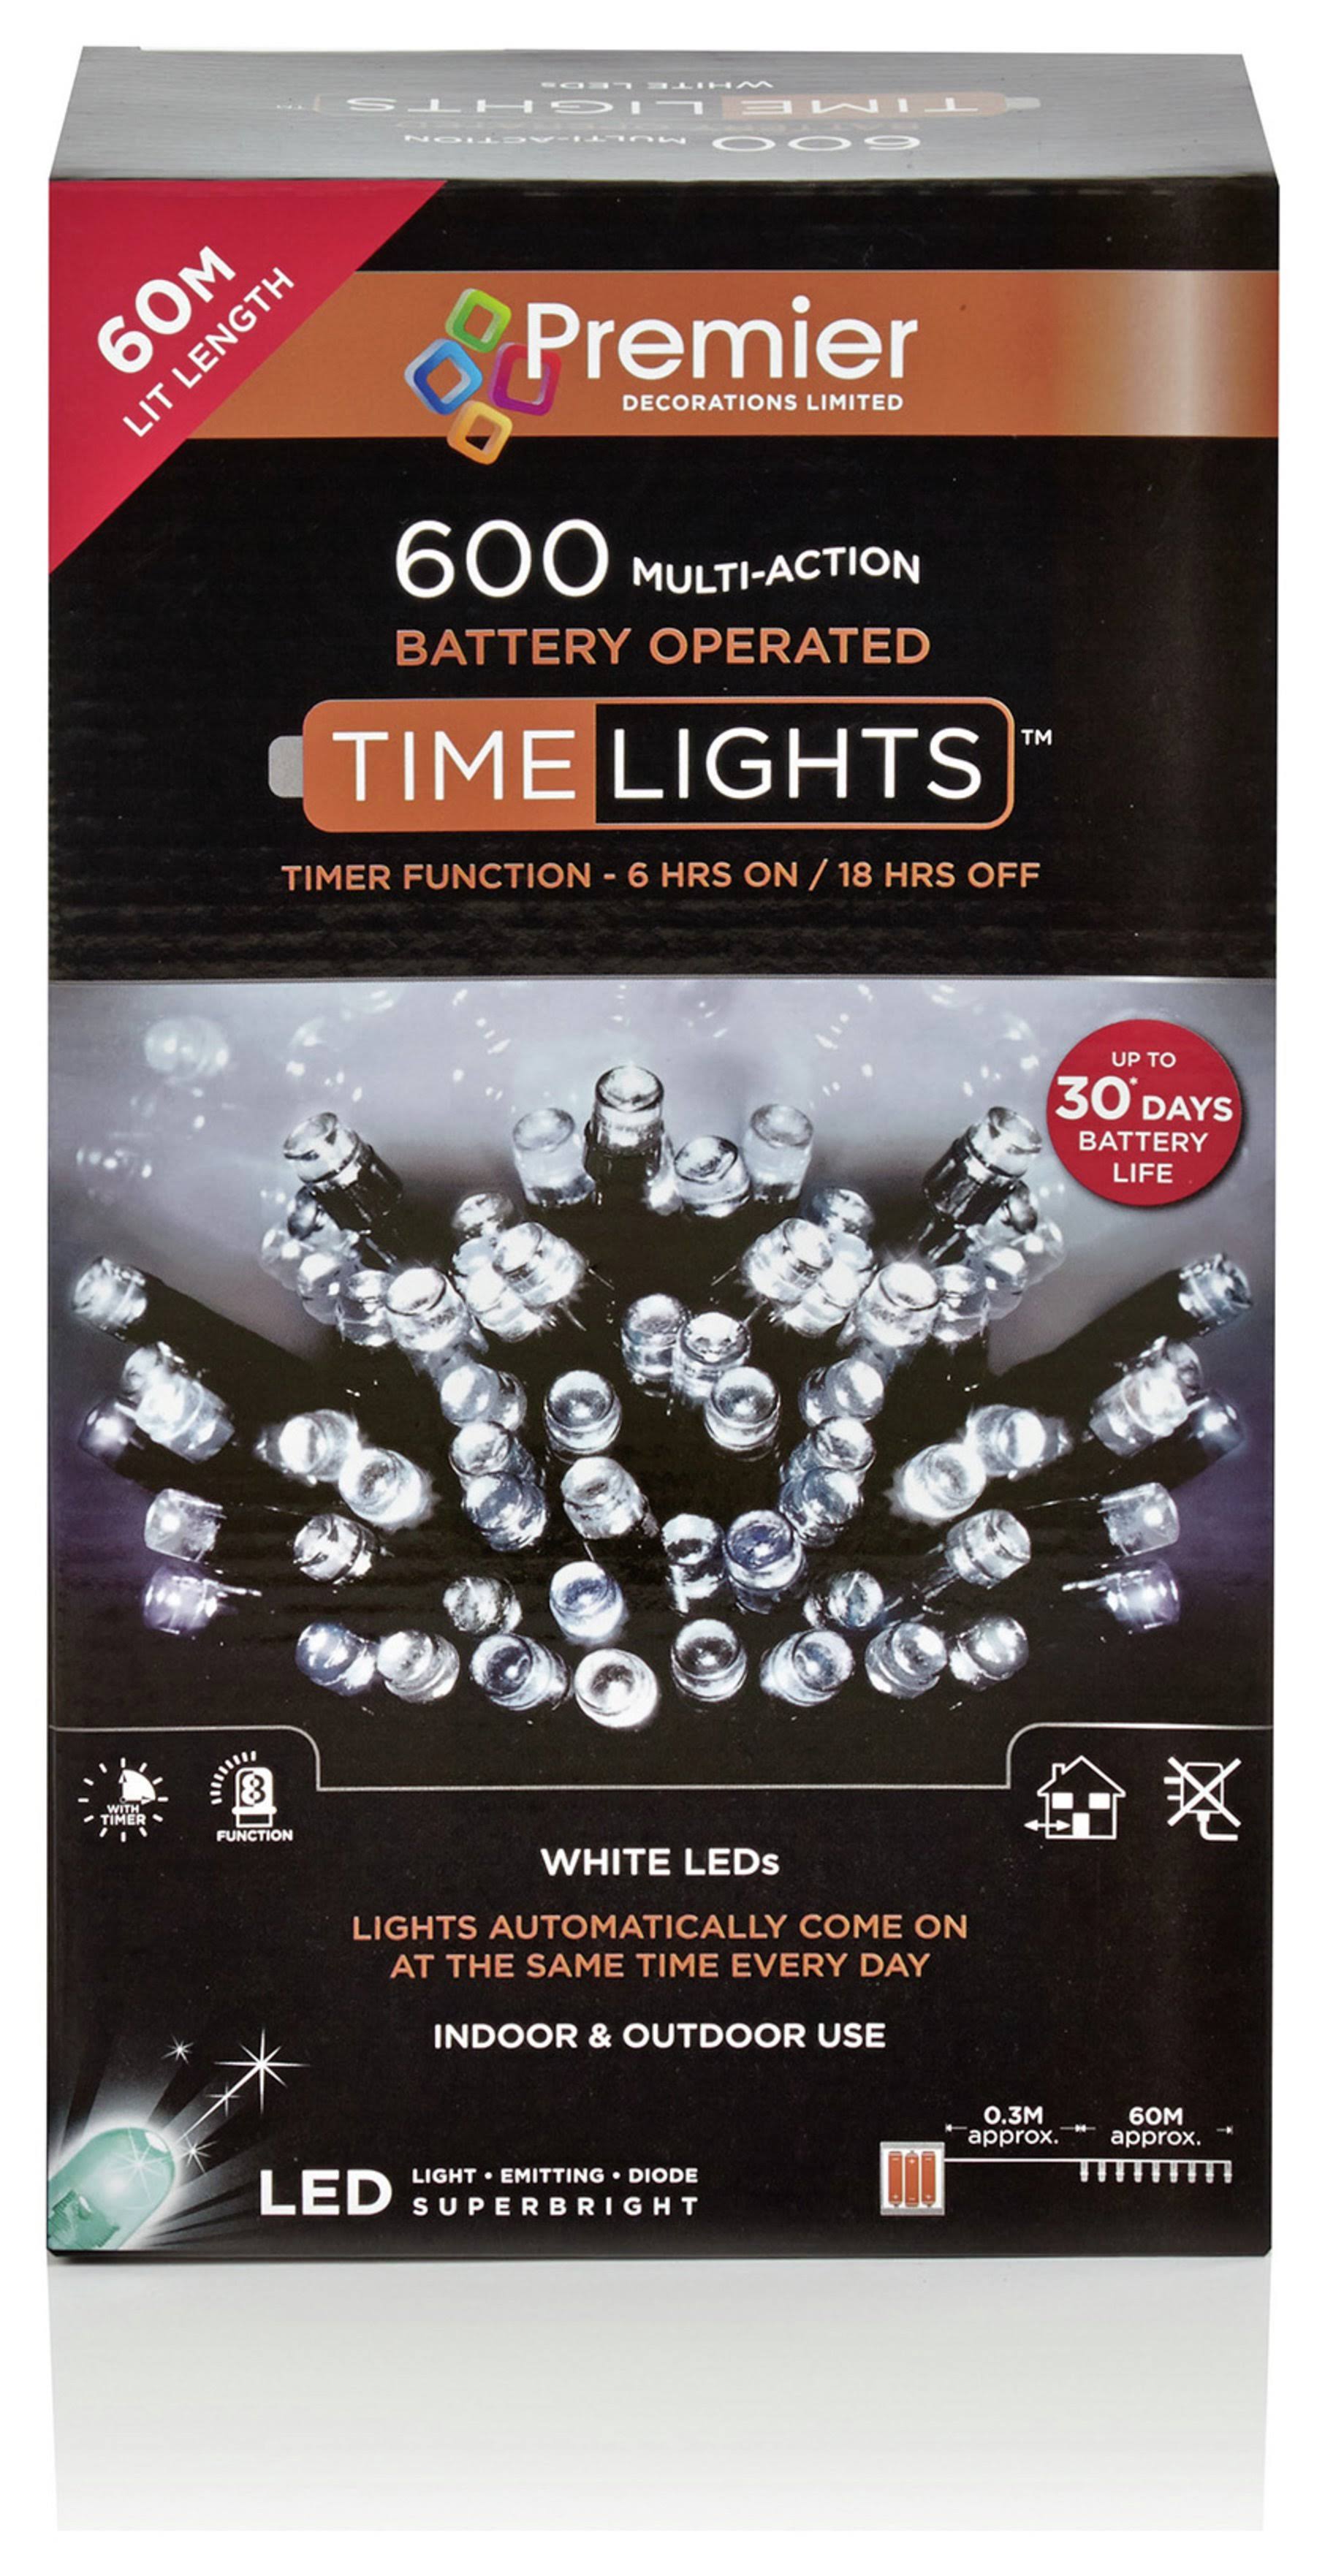 Premier 600 Multi-Action Battery Operated White LED Lights